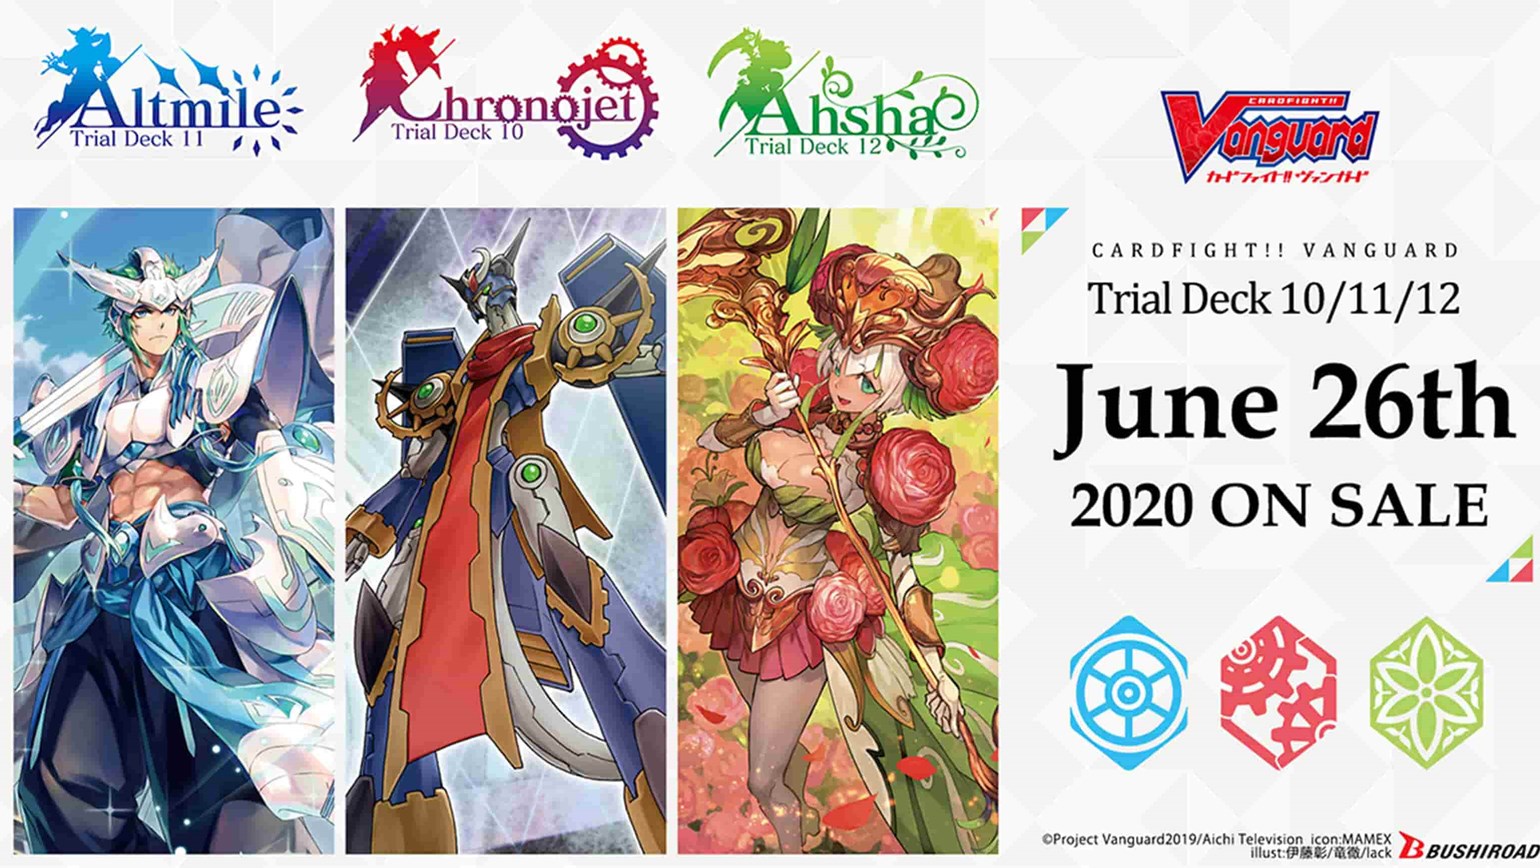 Three New English Edition Cardfight!! Vanguard Trial Decks Coming to Stores on June 26th